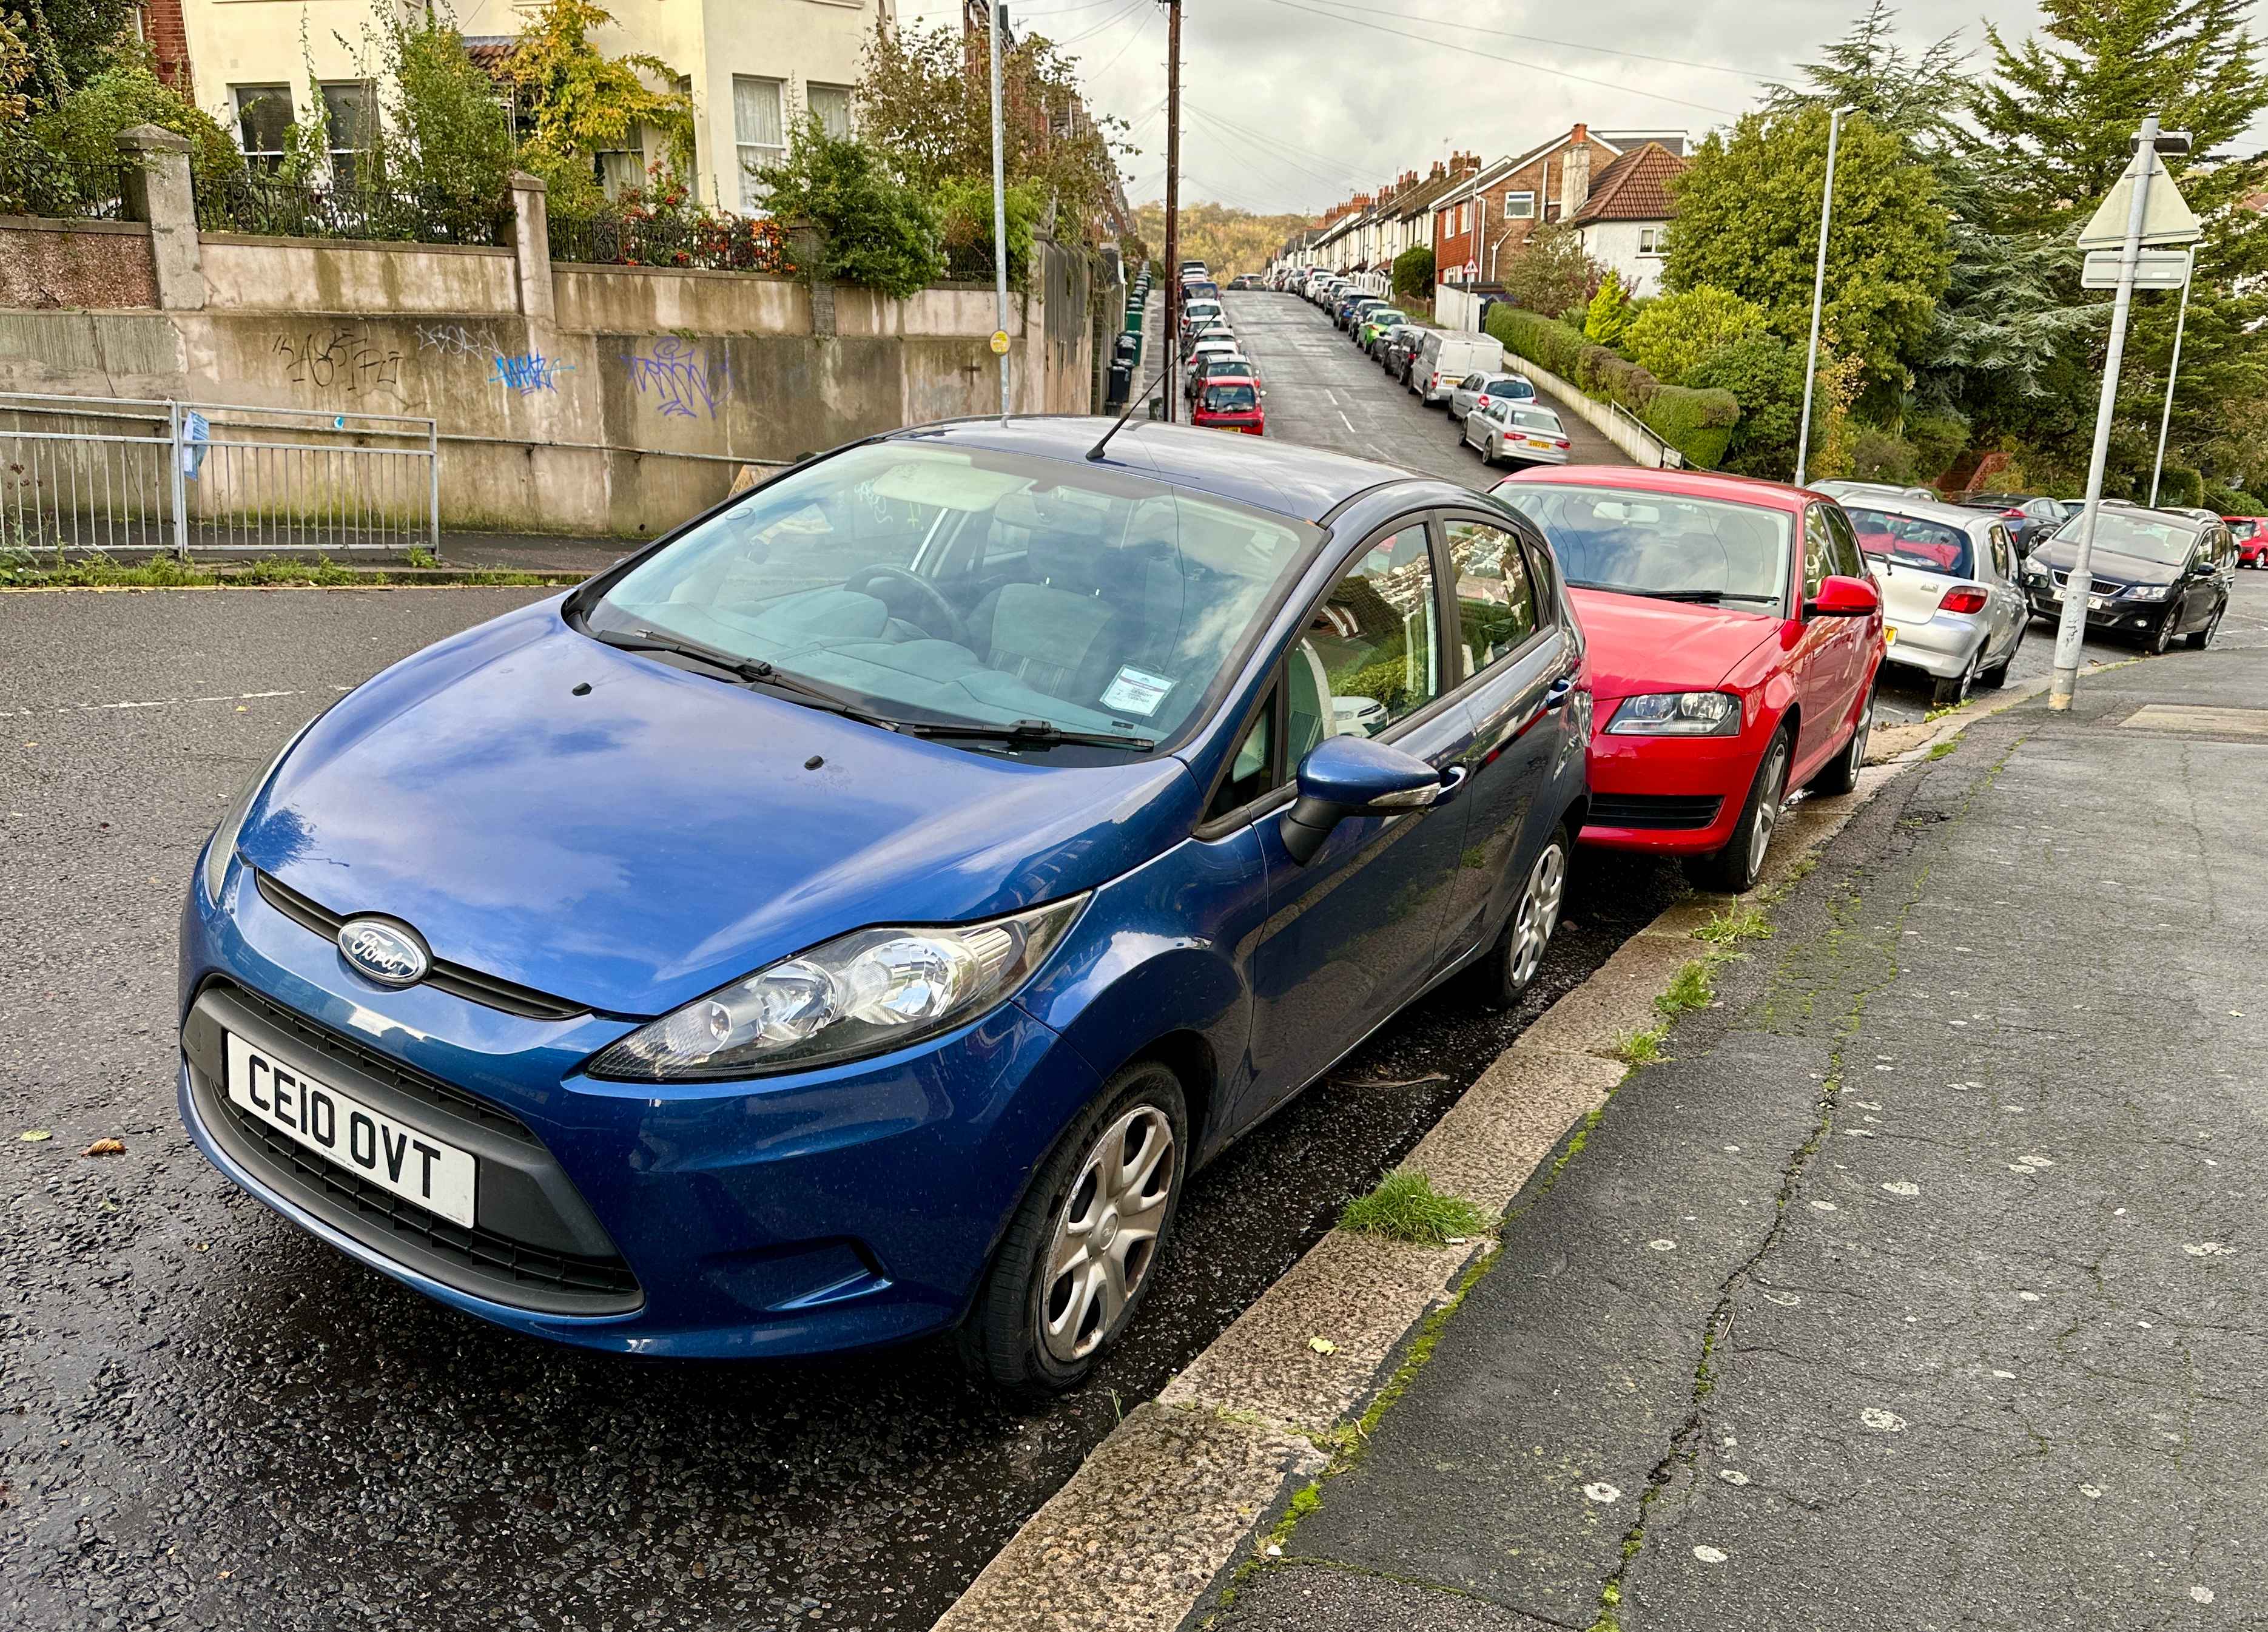 Photograph of CE10 OVT - a Blue Ford Fiesta parked in Hollingdean by a non-resident. The second of two photographs supplied by the residents of Hollingdean.